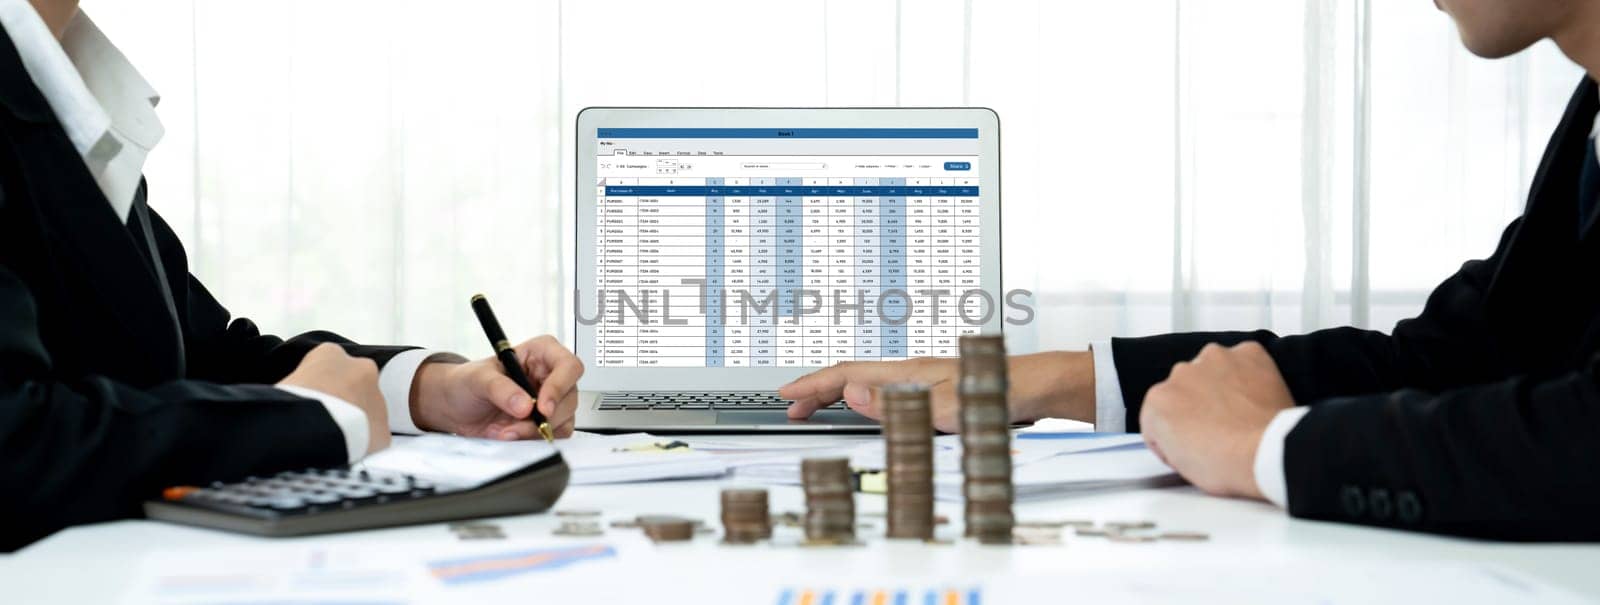 Corporate accountant use accounting software on laptop to calculate and maximize tax refunds and improve financial performance with business investment concept of growth stack coin in panorama. Shrewd